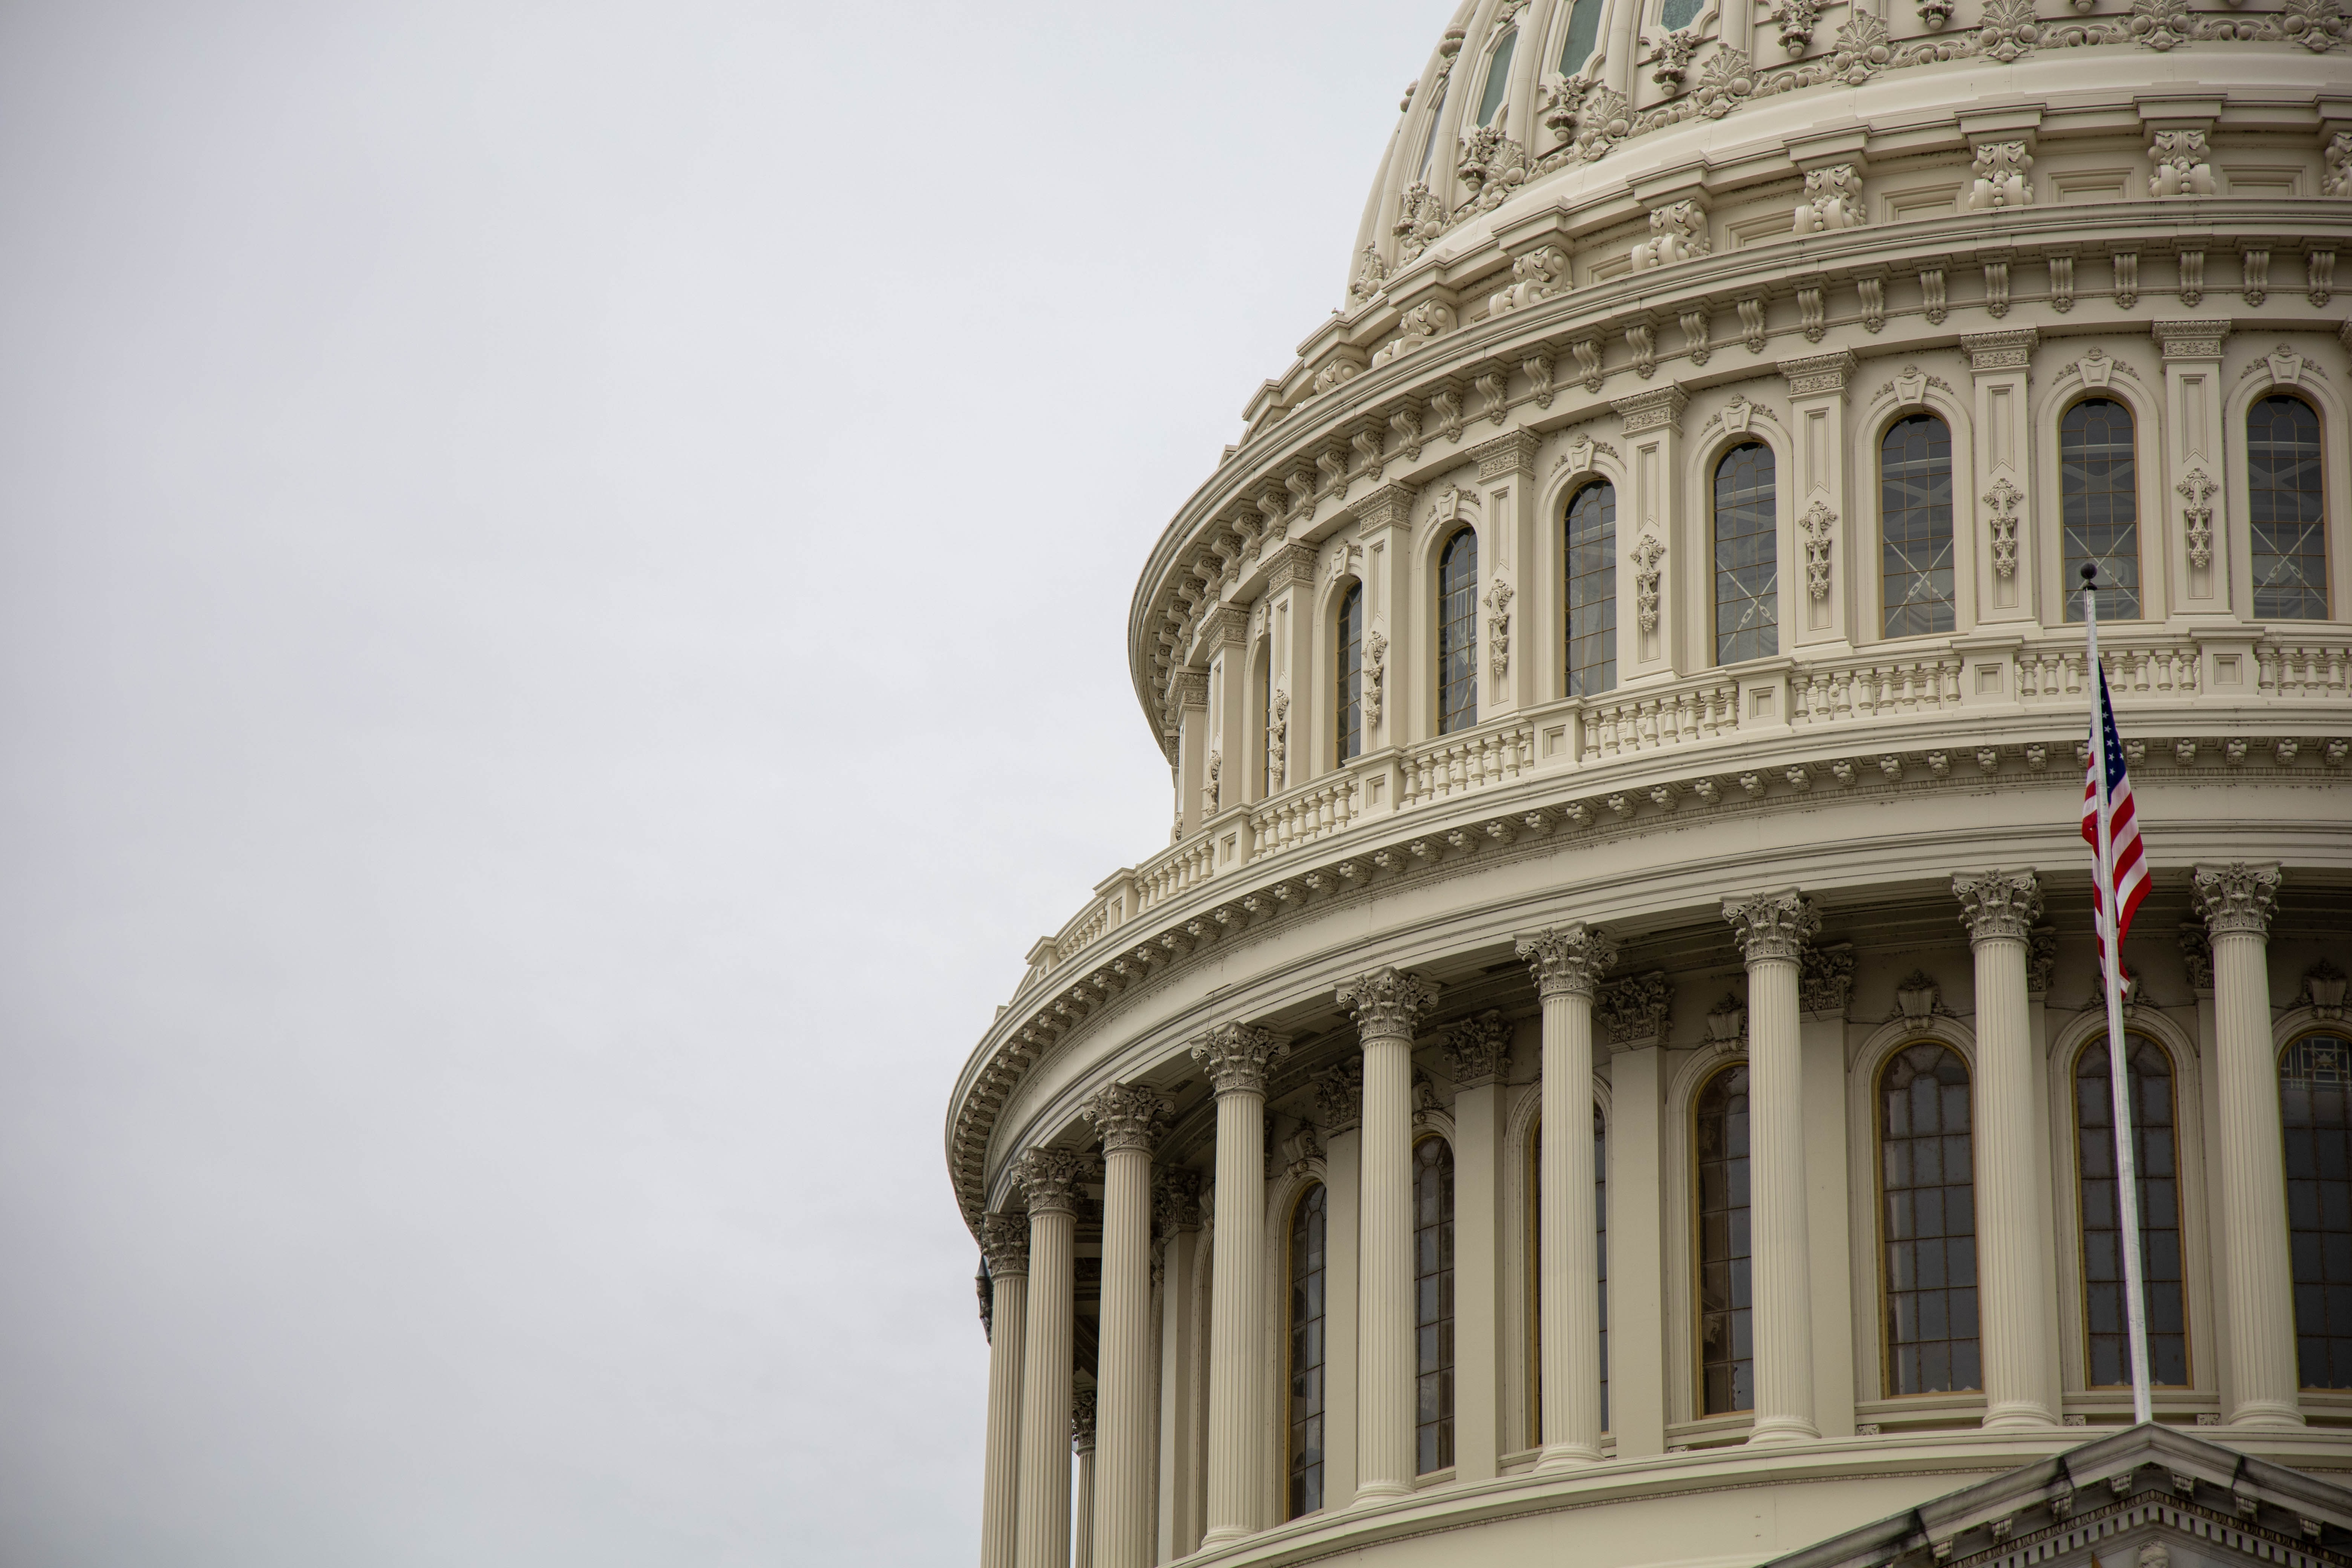 Photo of the top of the dome of the U.S. Capitol building highlighting the architectural details and columns with an American flag on a pole in the foreground. 